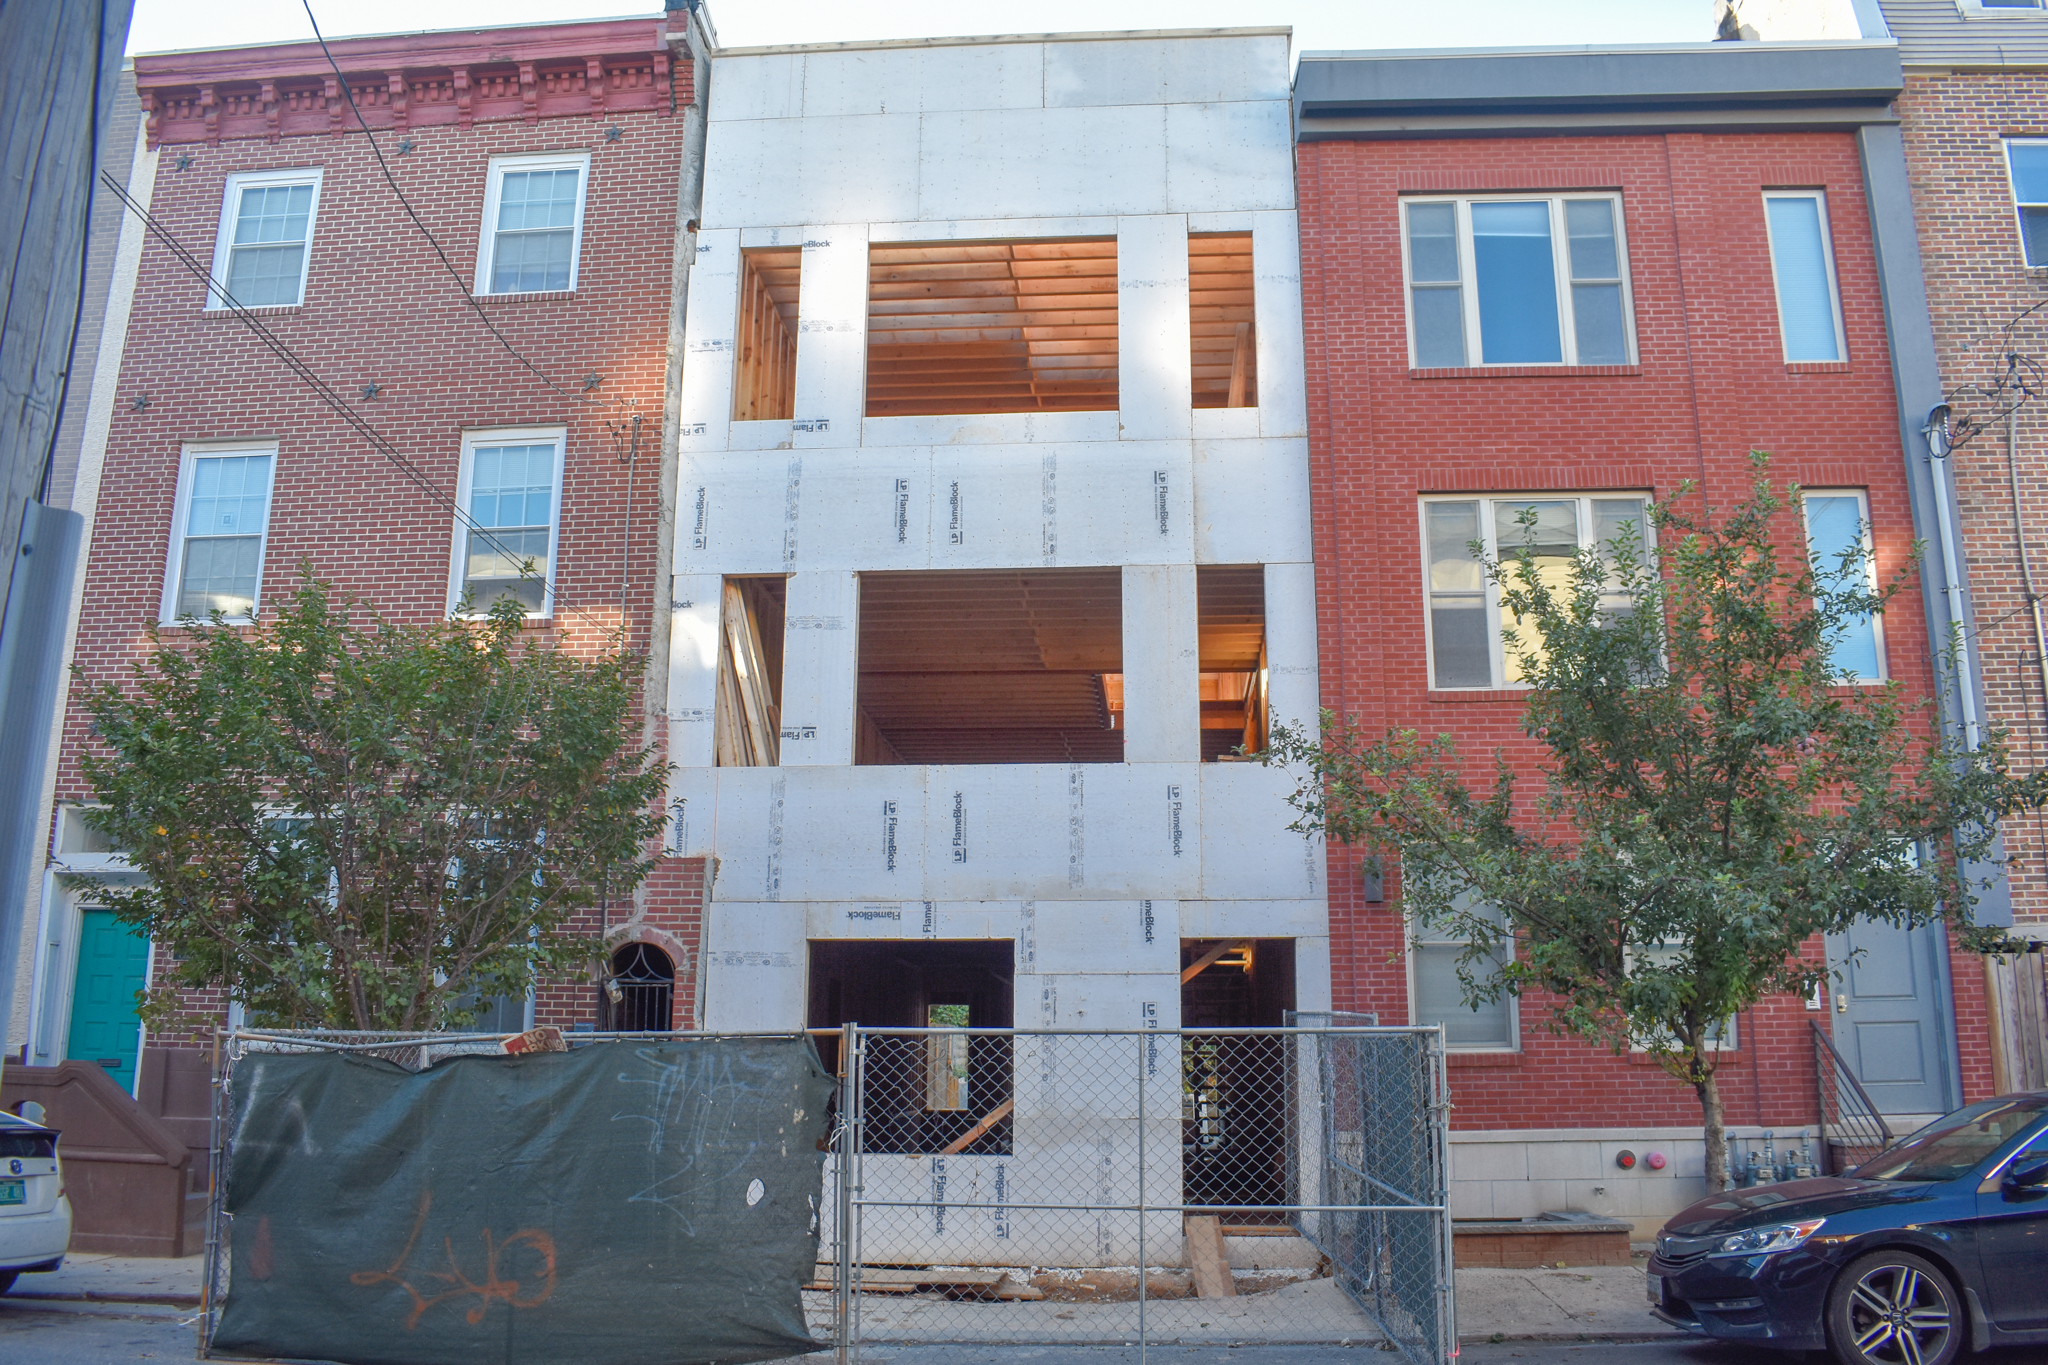 1312 North 6th Street. Photo by Jamie Meller. October 2022